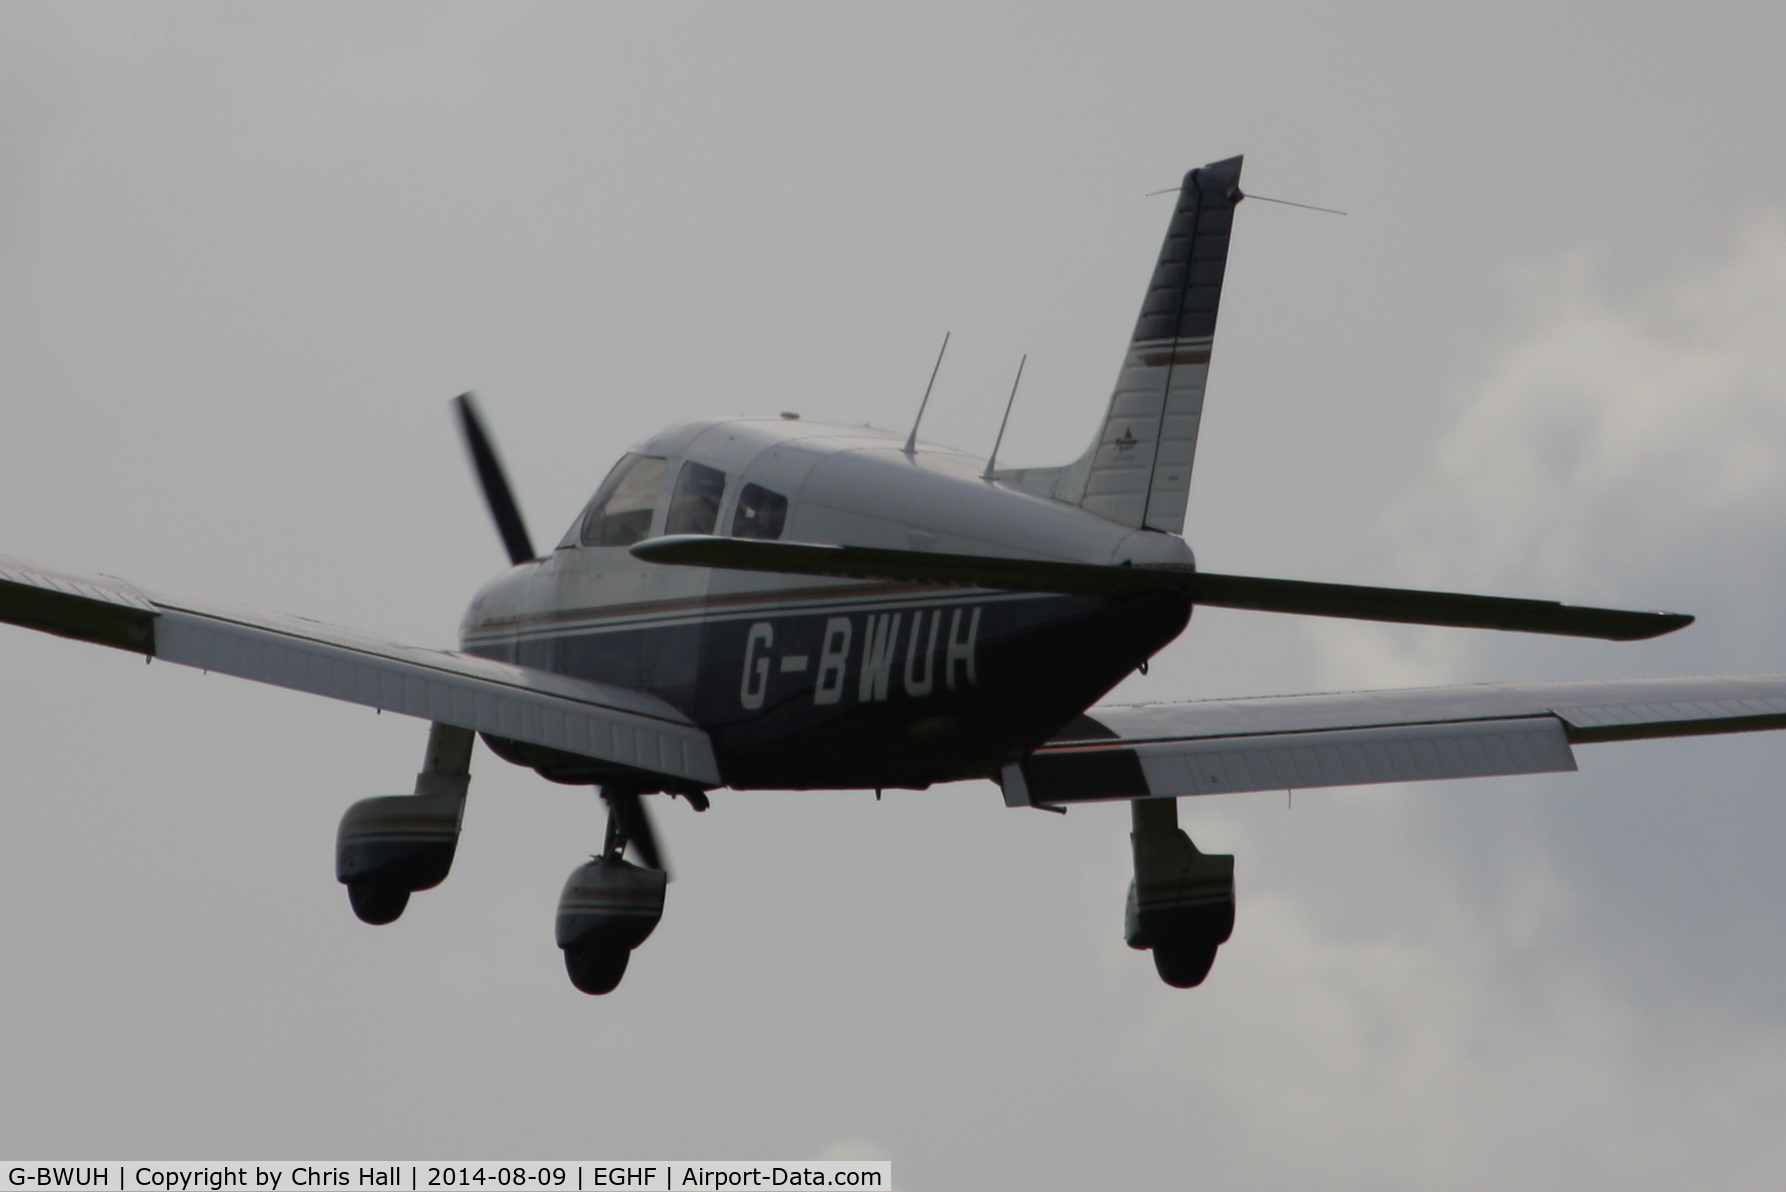 G-BWUH, 1996 Piper PA-28-181 Cherokee Archer III C/N 2843048, at Lee on Solent